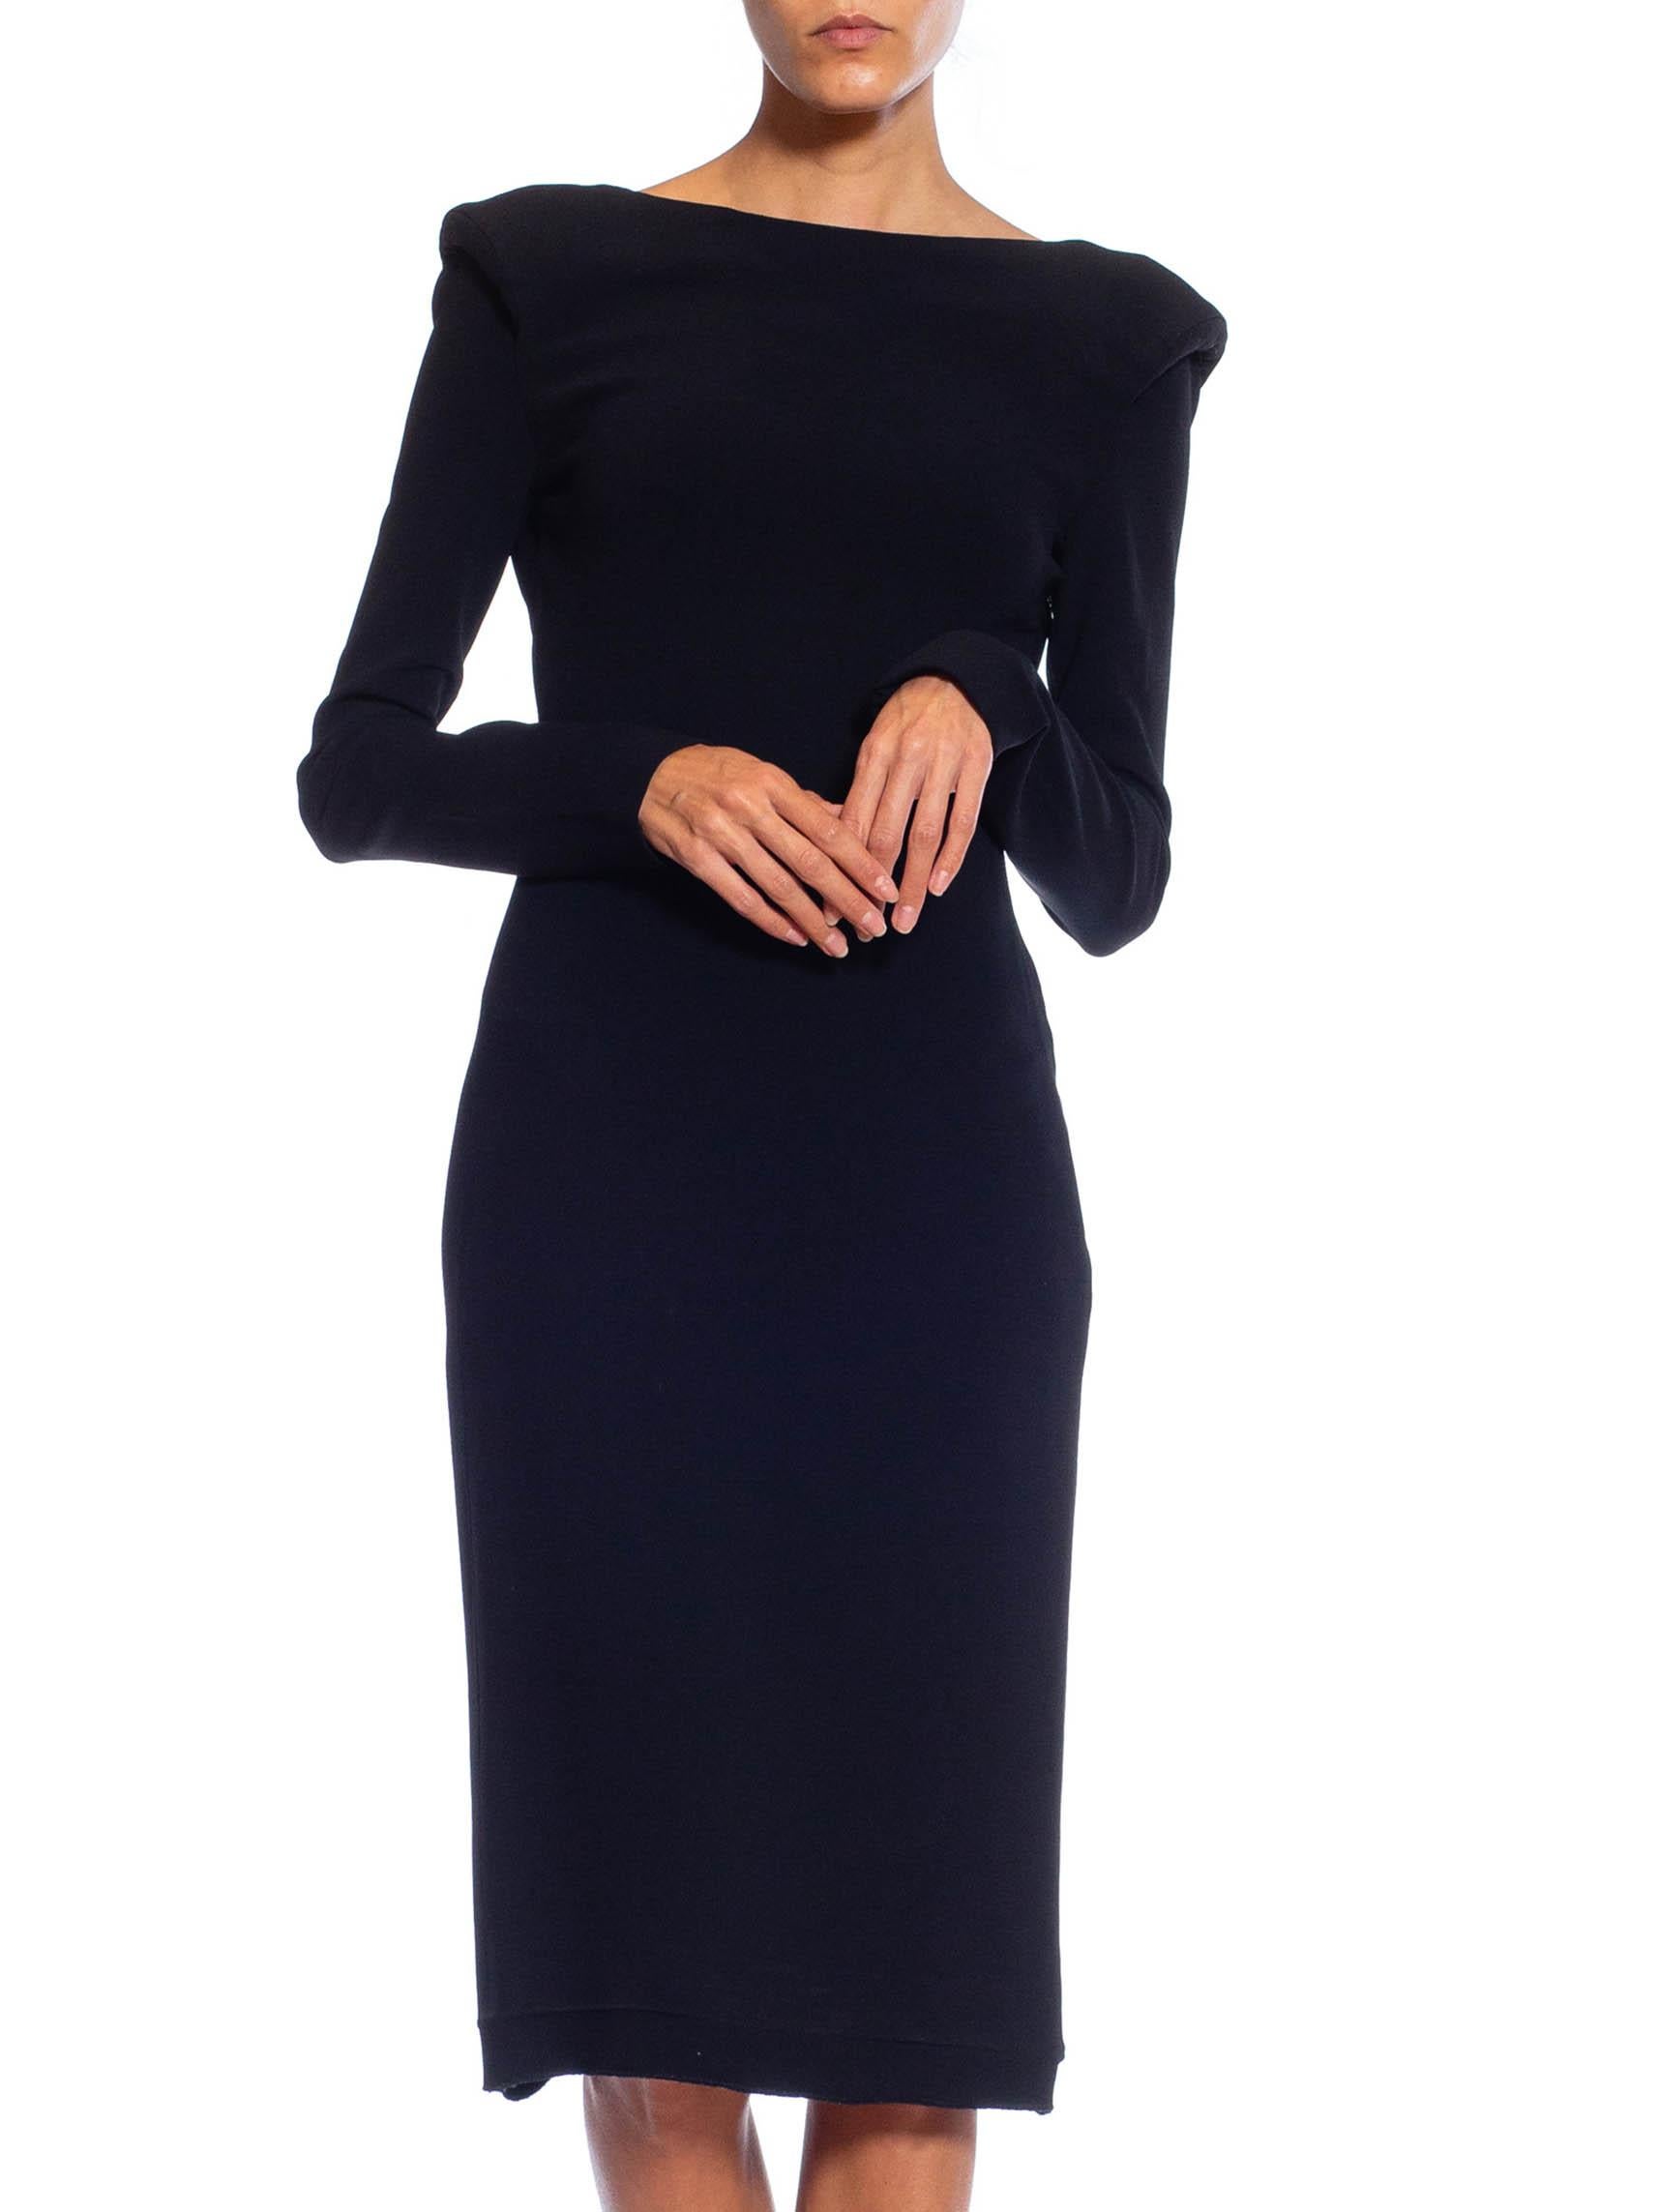 Women's 2000S TOM FORD Black Viscose Blend Long Sleeve Backless Dress With Padded Shoul For Sale